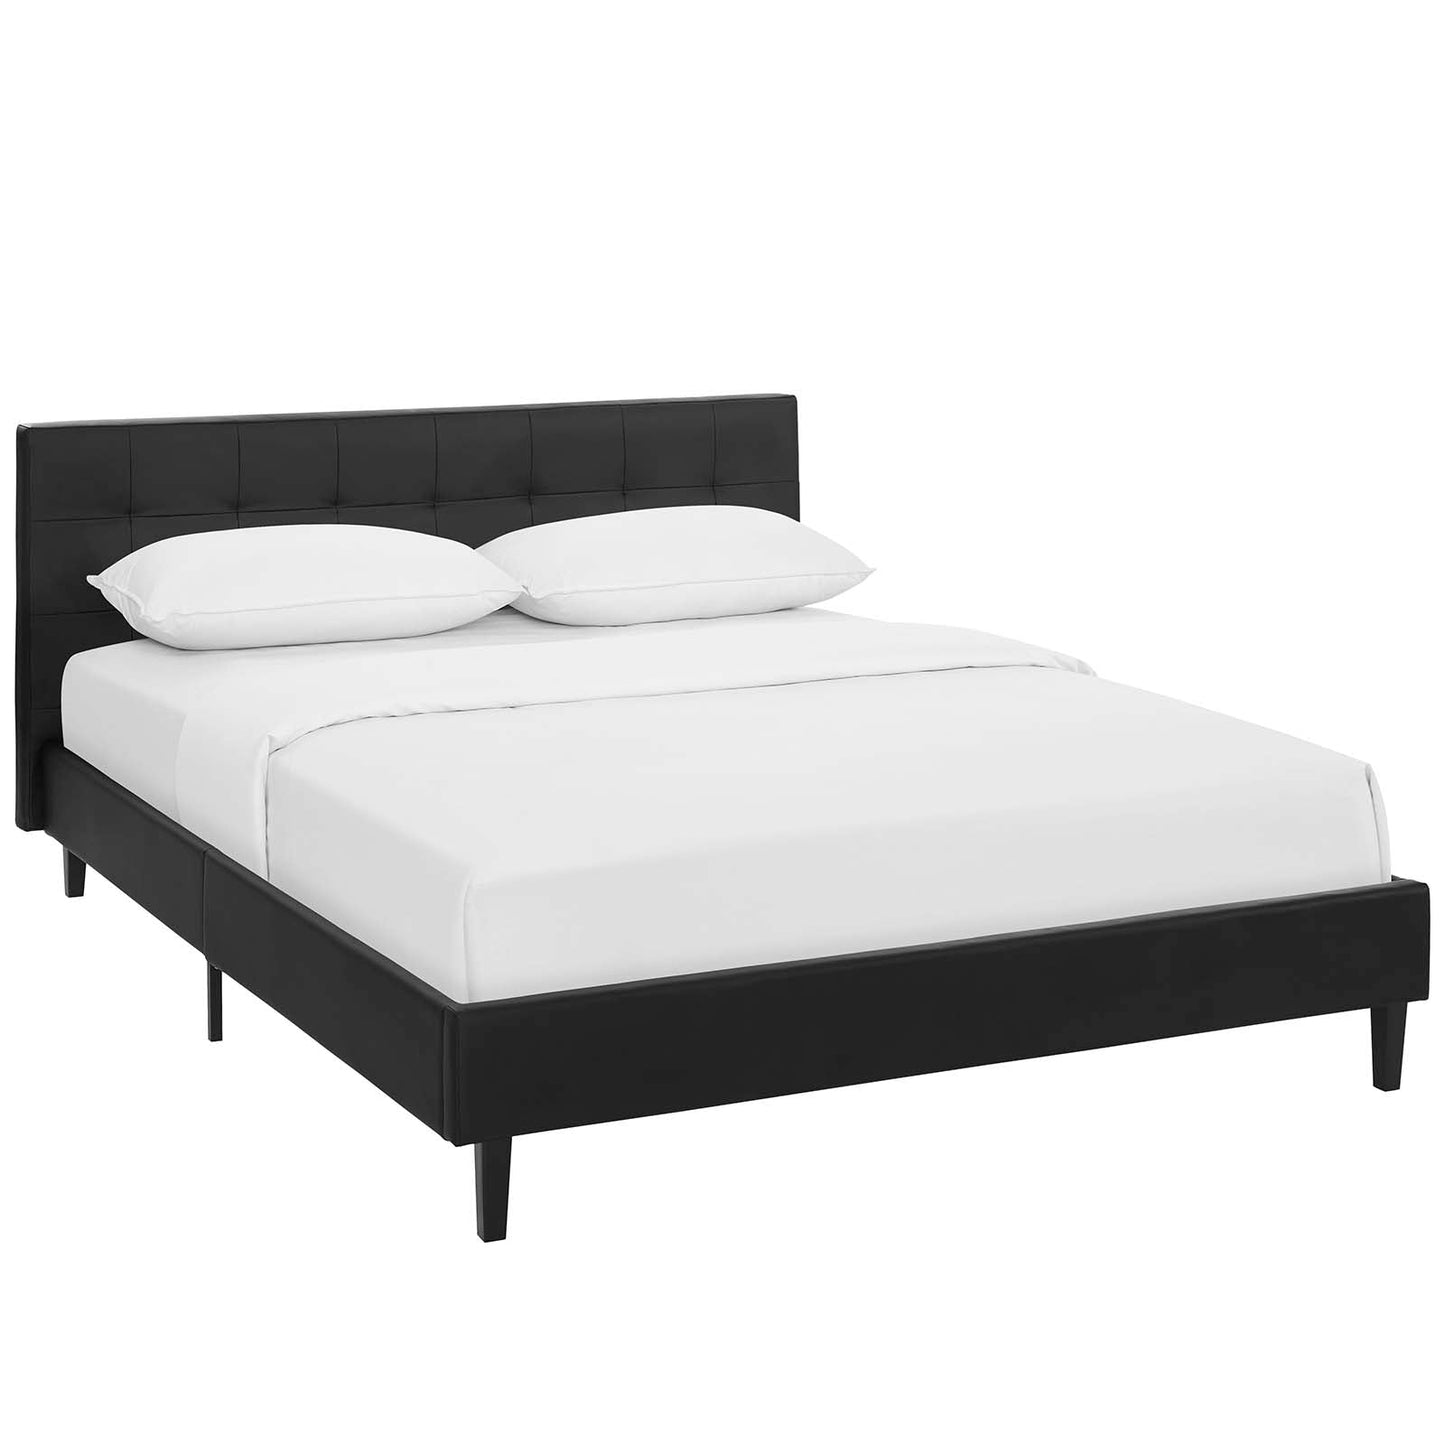 Modway Beds & Bed Frames Linnea Queen Faux Leather Bed MOD-5425-BLK